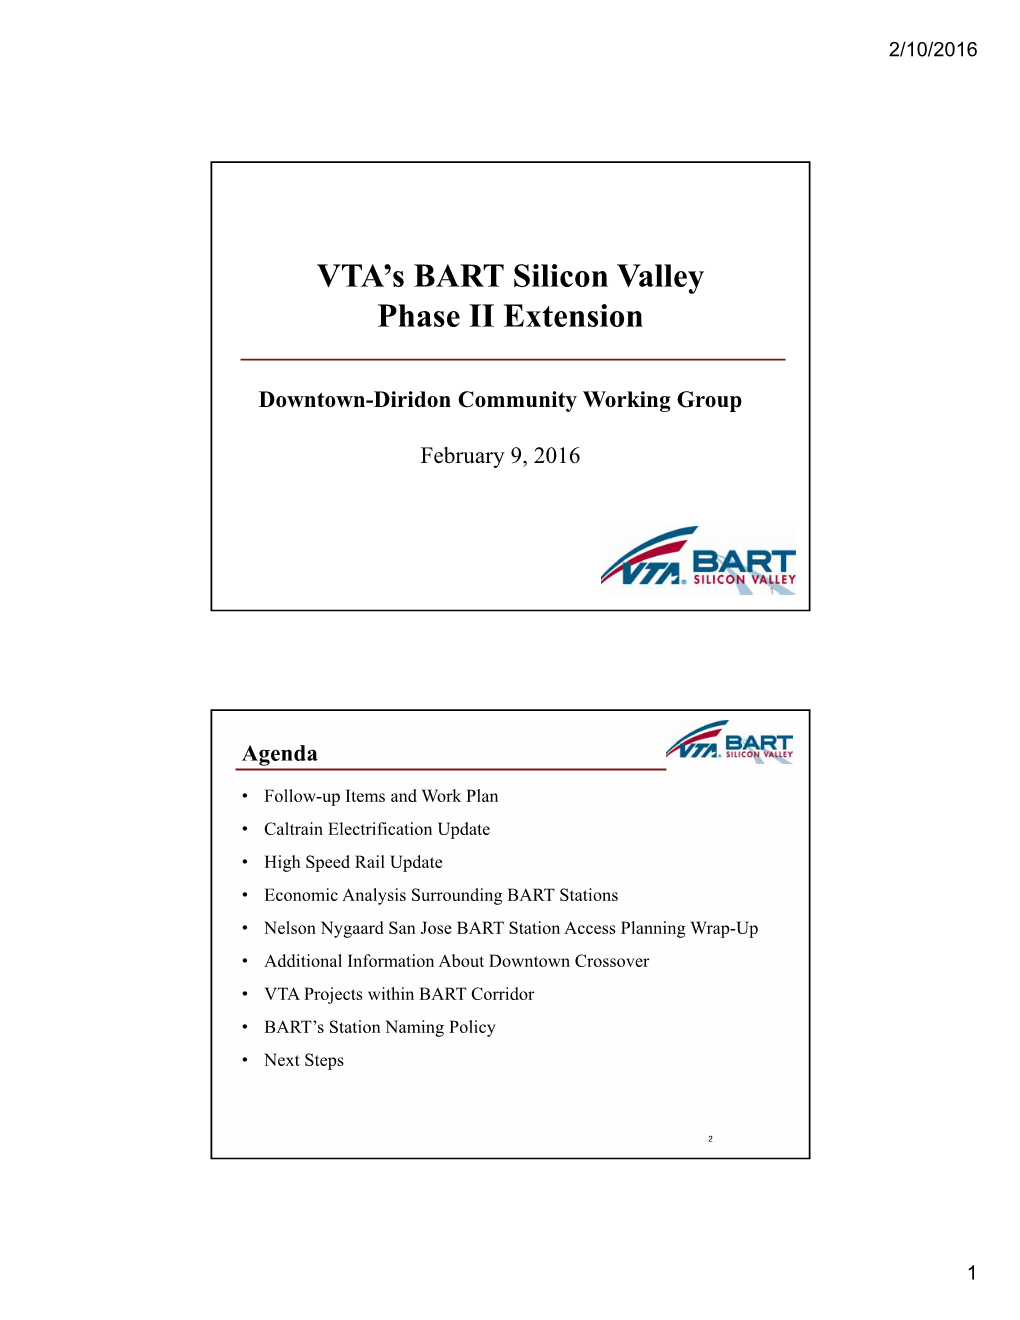 VTA's BART Silicon Valley Phase II Extension